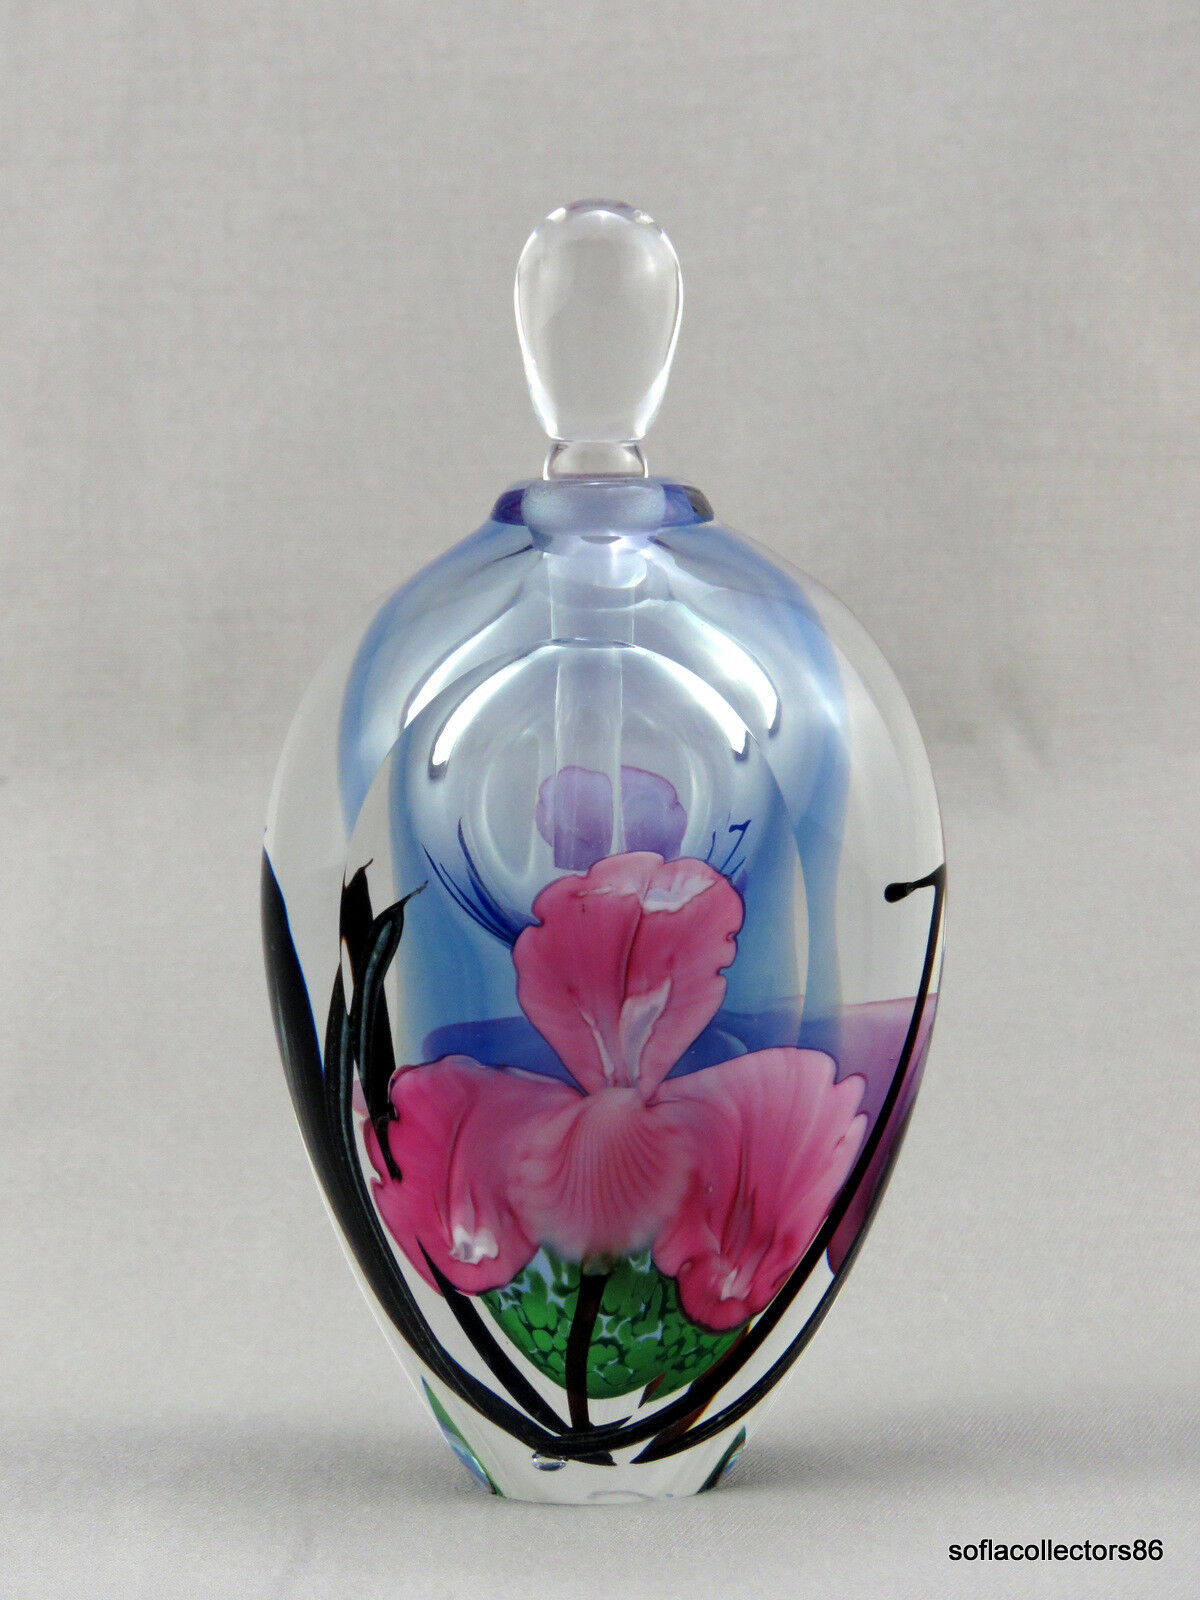 Satava Paperweight Type Perfume Bottle - Faceted with Pink Irises - 1993